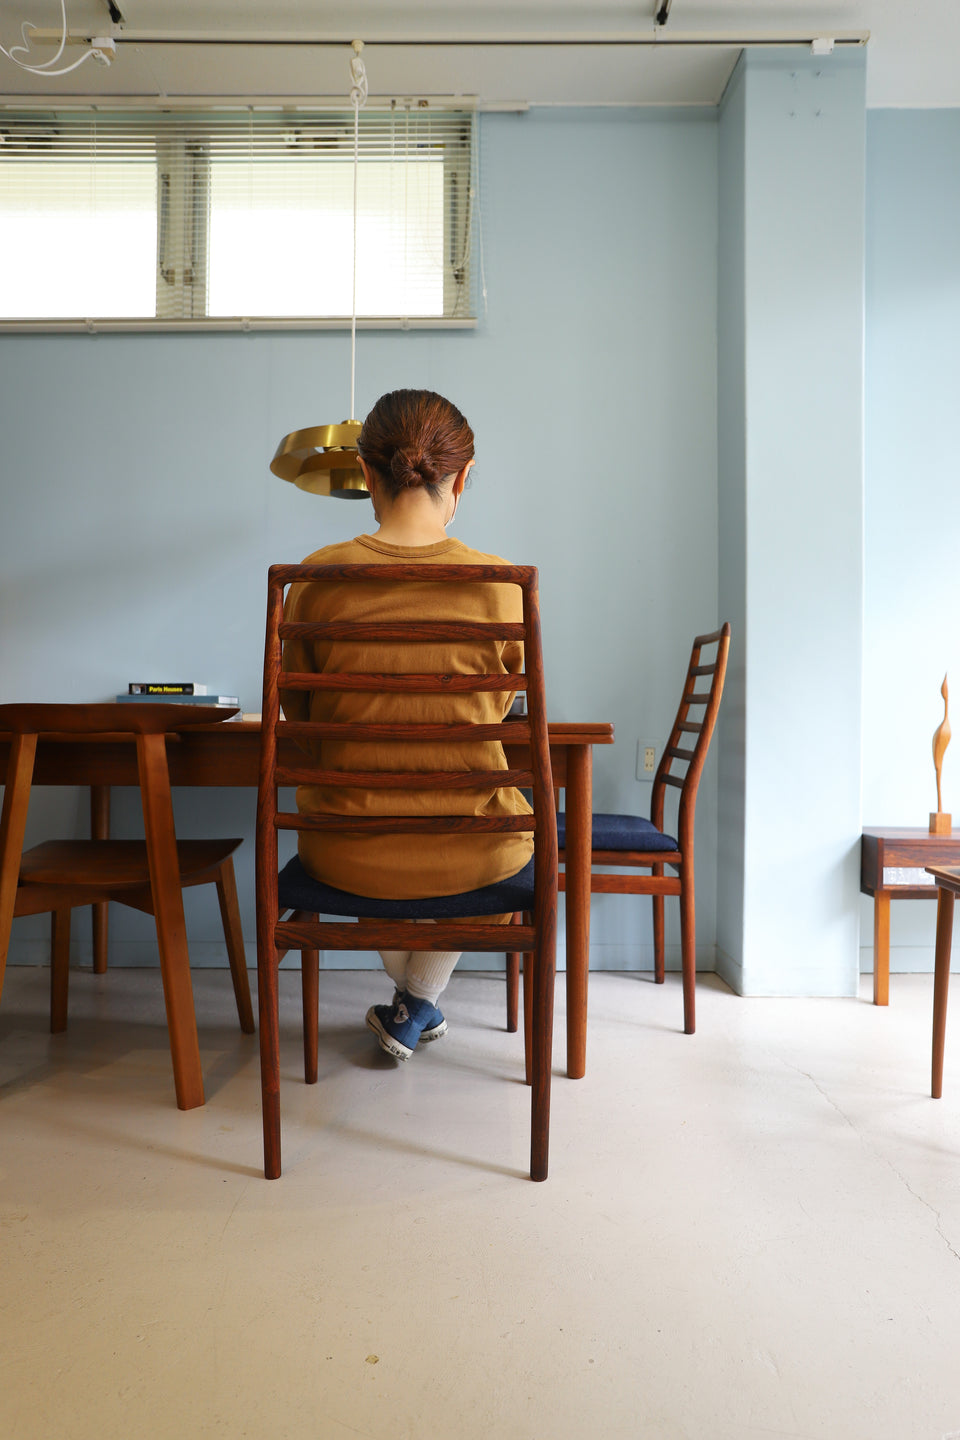 Sorø Stolefabrik High Back Dining Chair Rosewood/デンマークヴィンテージ ダイニングチェア 椅子 ハイバック ローズウッド 北欧家具